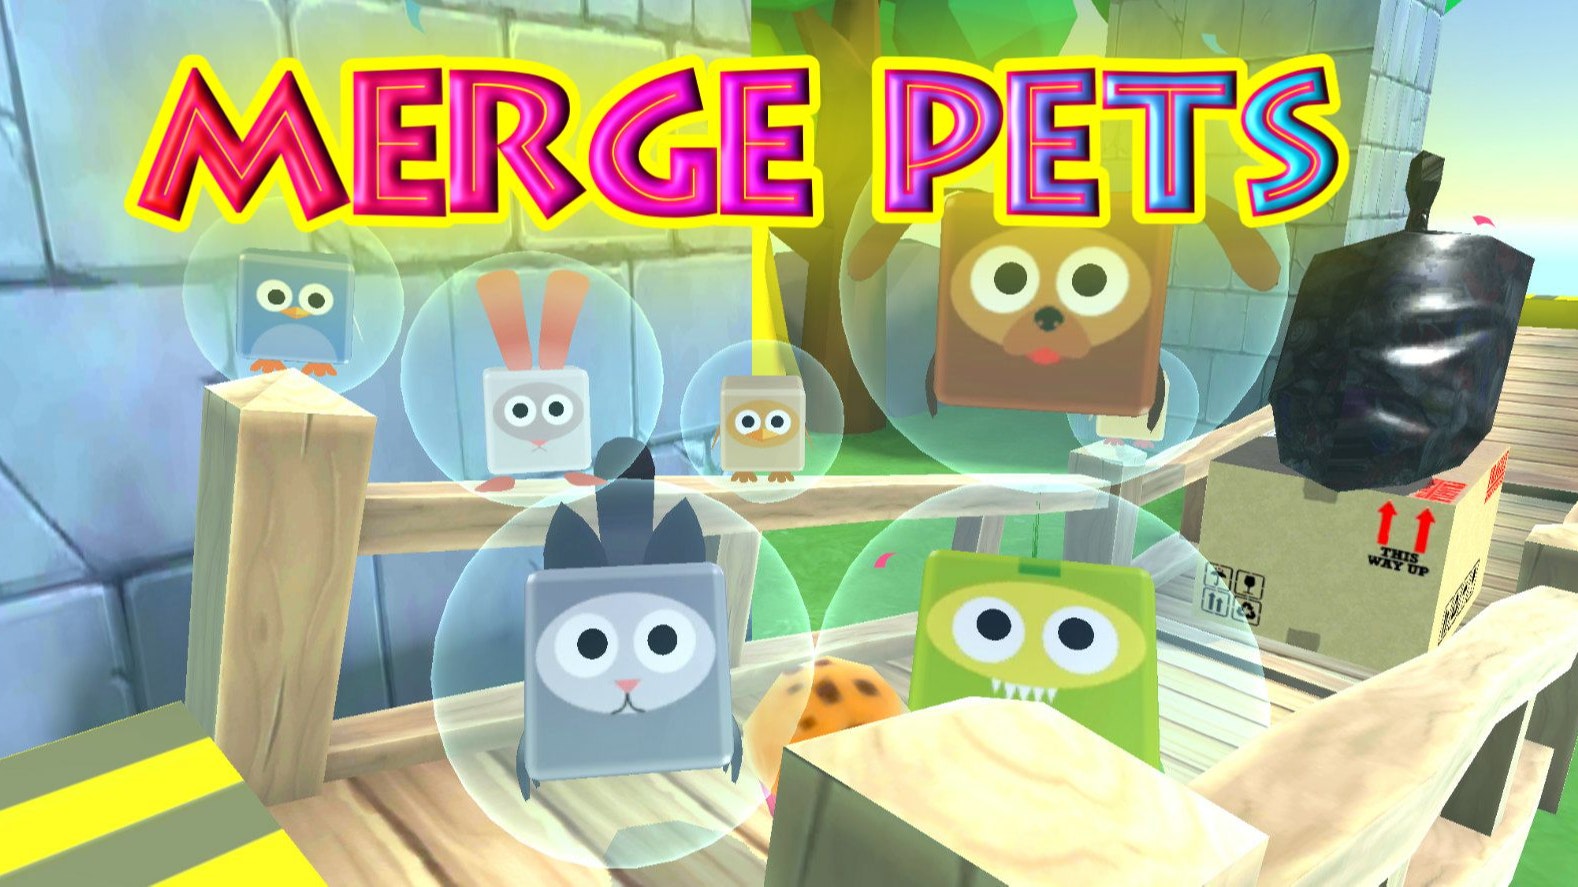 Play Pet Games on 1001Games, free for everybody!